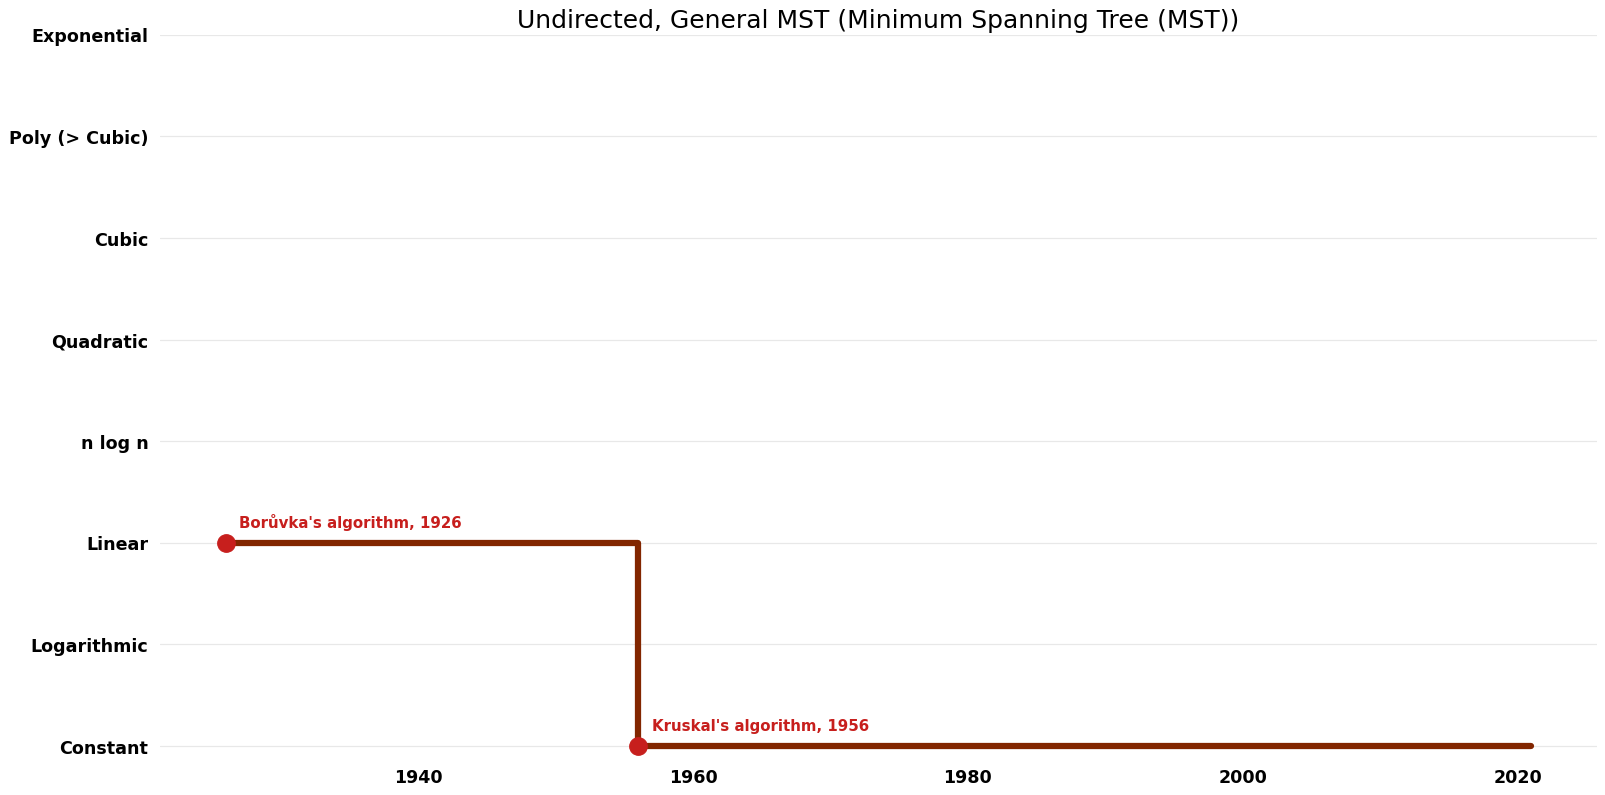 File:Minimum Spanning Tree (MST) - Undirected, General MST - Space.png